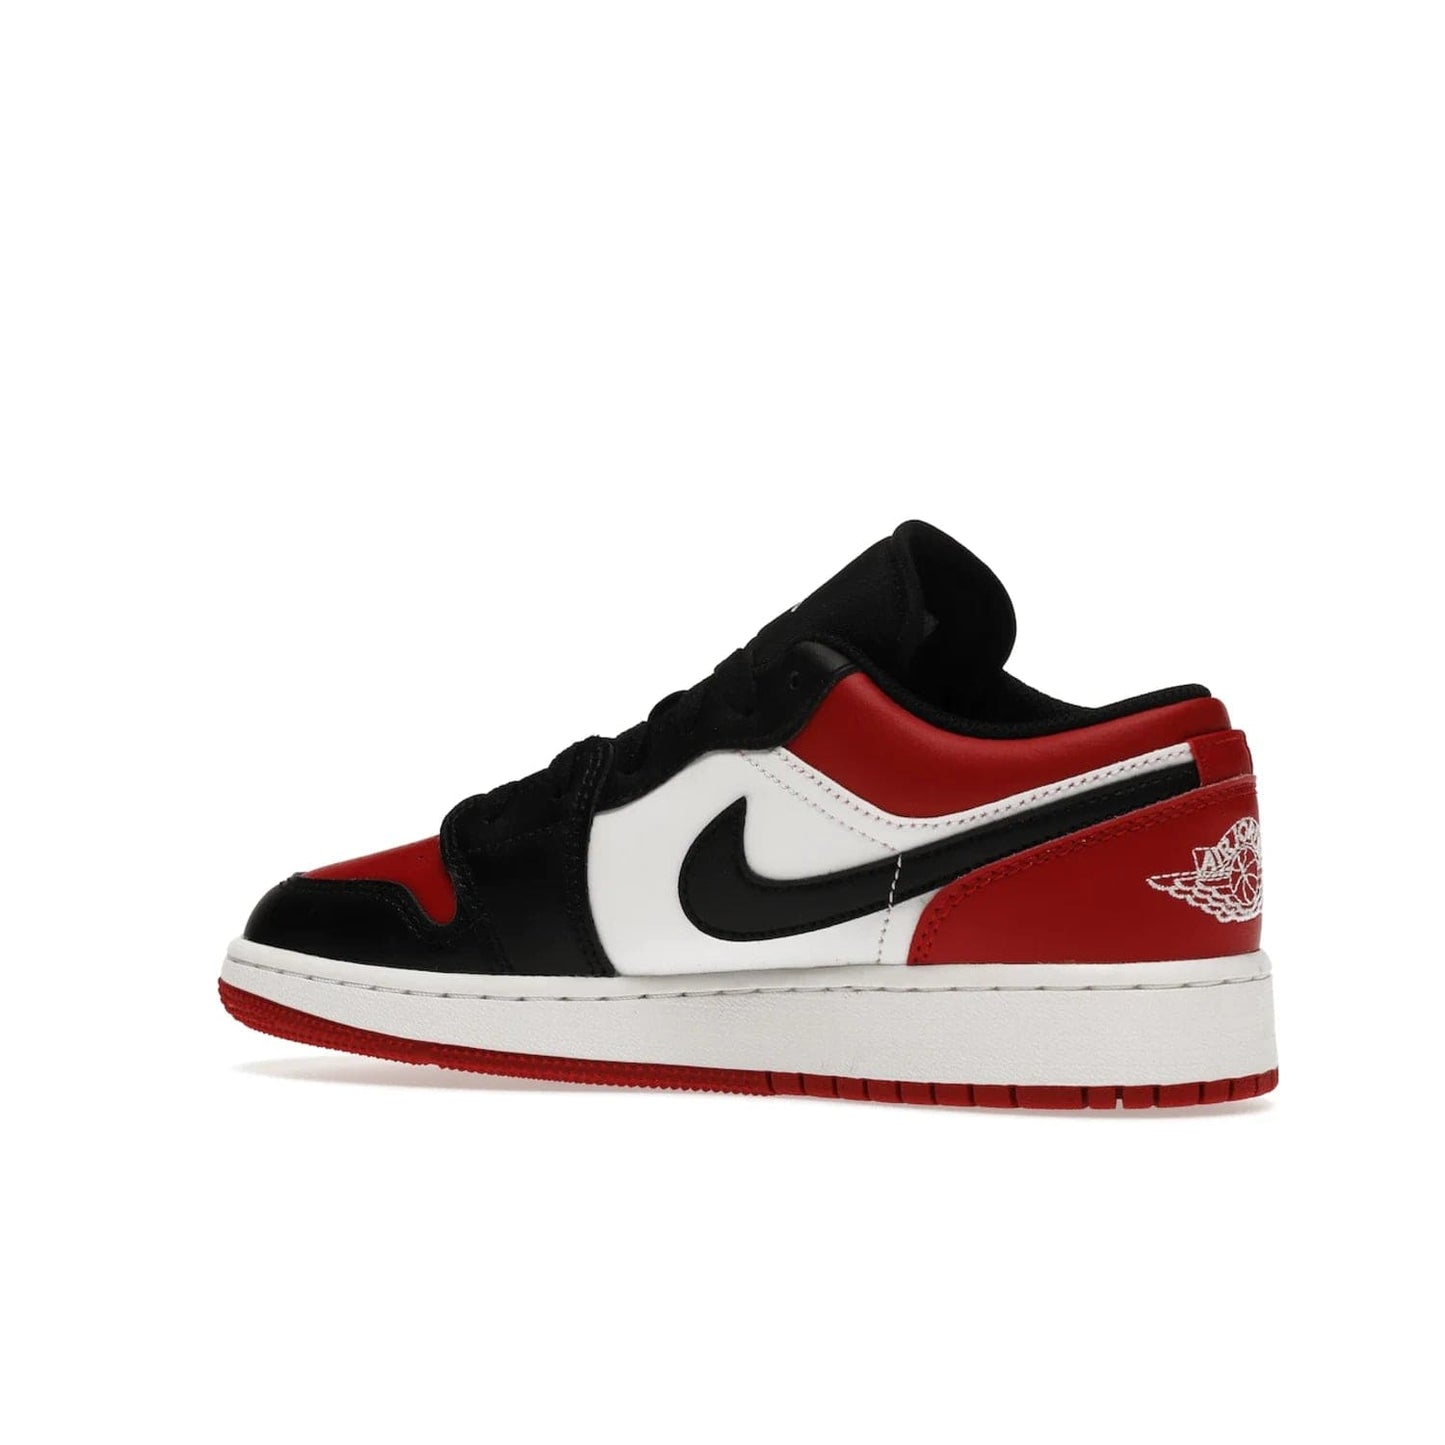 Jordan 1 Low Bred Toe (GS) - Image 22 - Only at www.BallersClubKickz.com - #
Iconic sneaker from Jordan brand with classic colorway, unique detailing & Air Jordan Wings logo. Step into the shoes of the greats with the Jordan 1 Low Bred Toe GS!